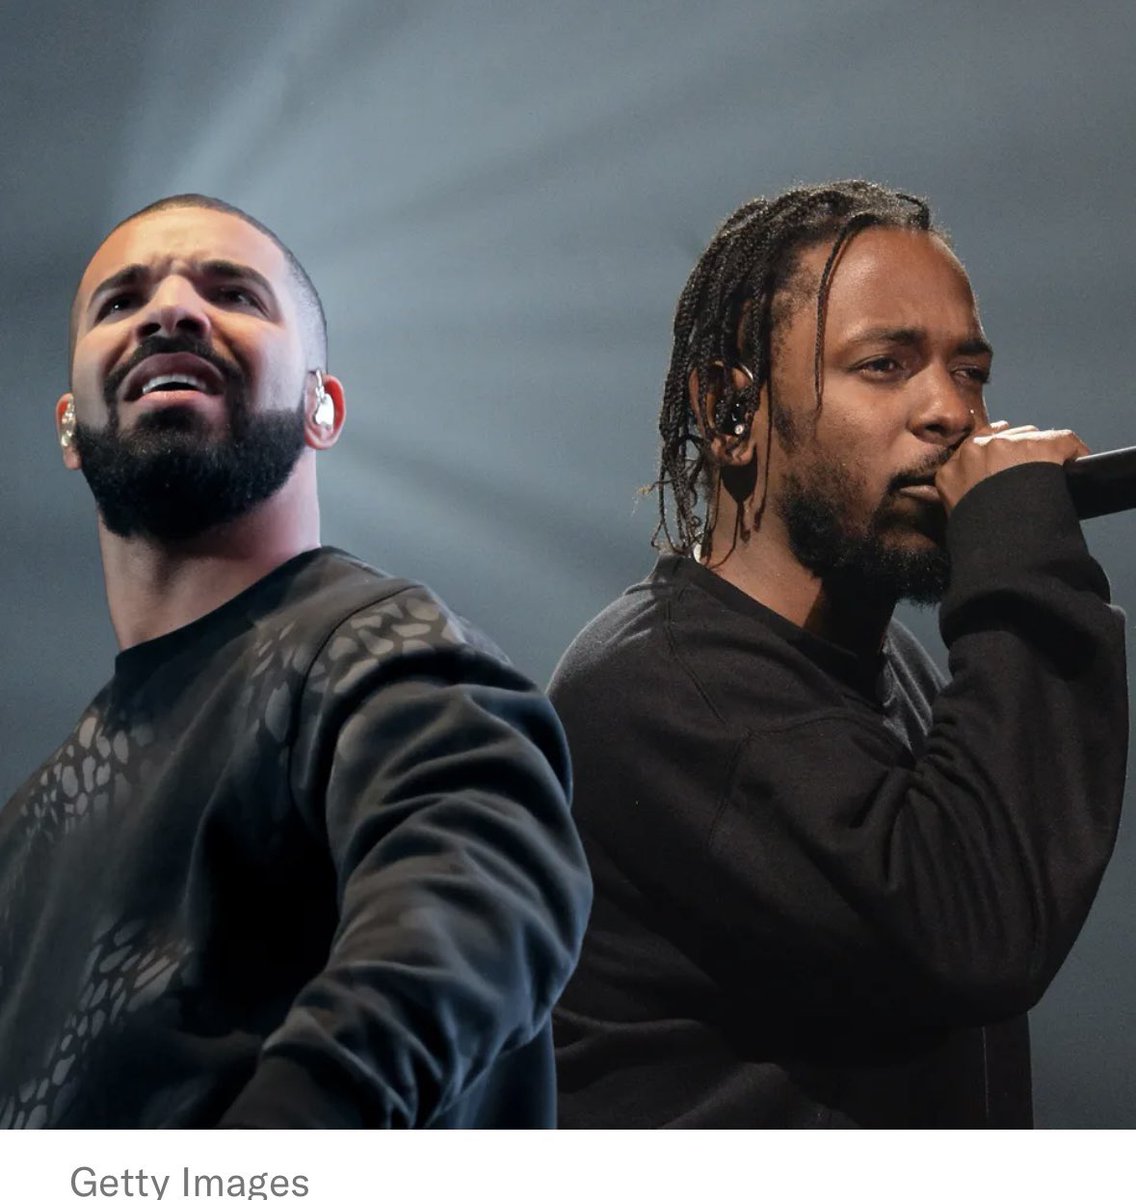 Kendrick breaking streaming records w/ Drake diss ‘Euphoria’ is wild - I’m hearing Aubs has a reply track & video coming VERY soon. It’s already done & shot. This ain’t ending soon. Also, both are making a lot of money off their beef 🤔